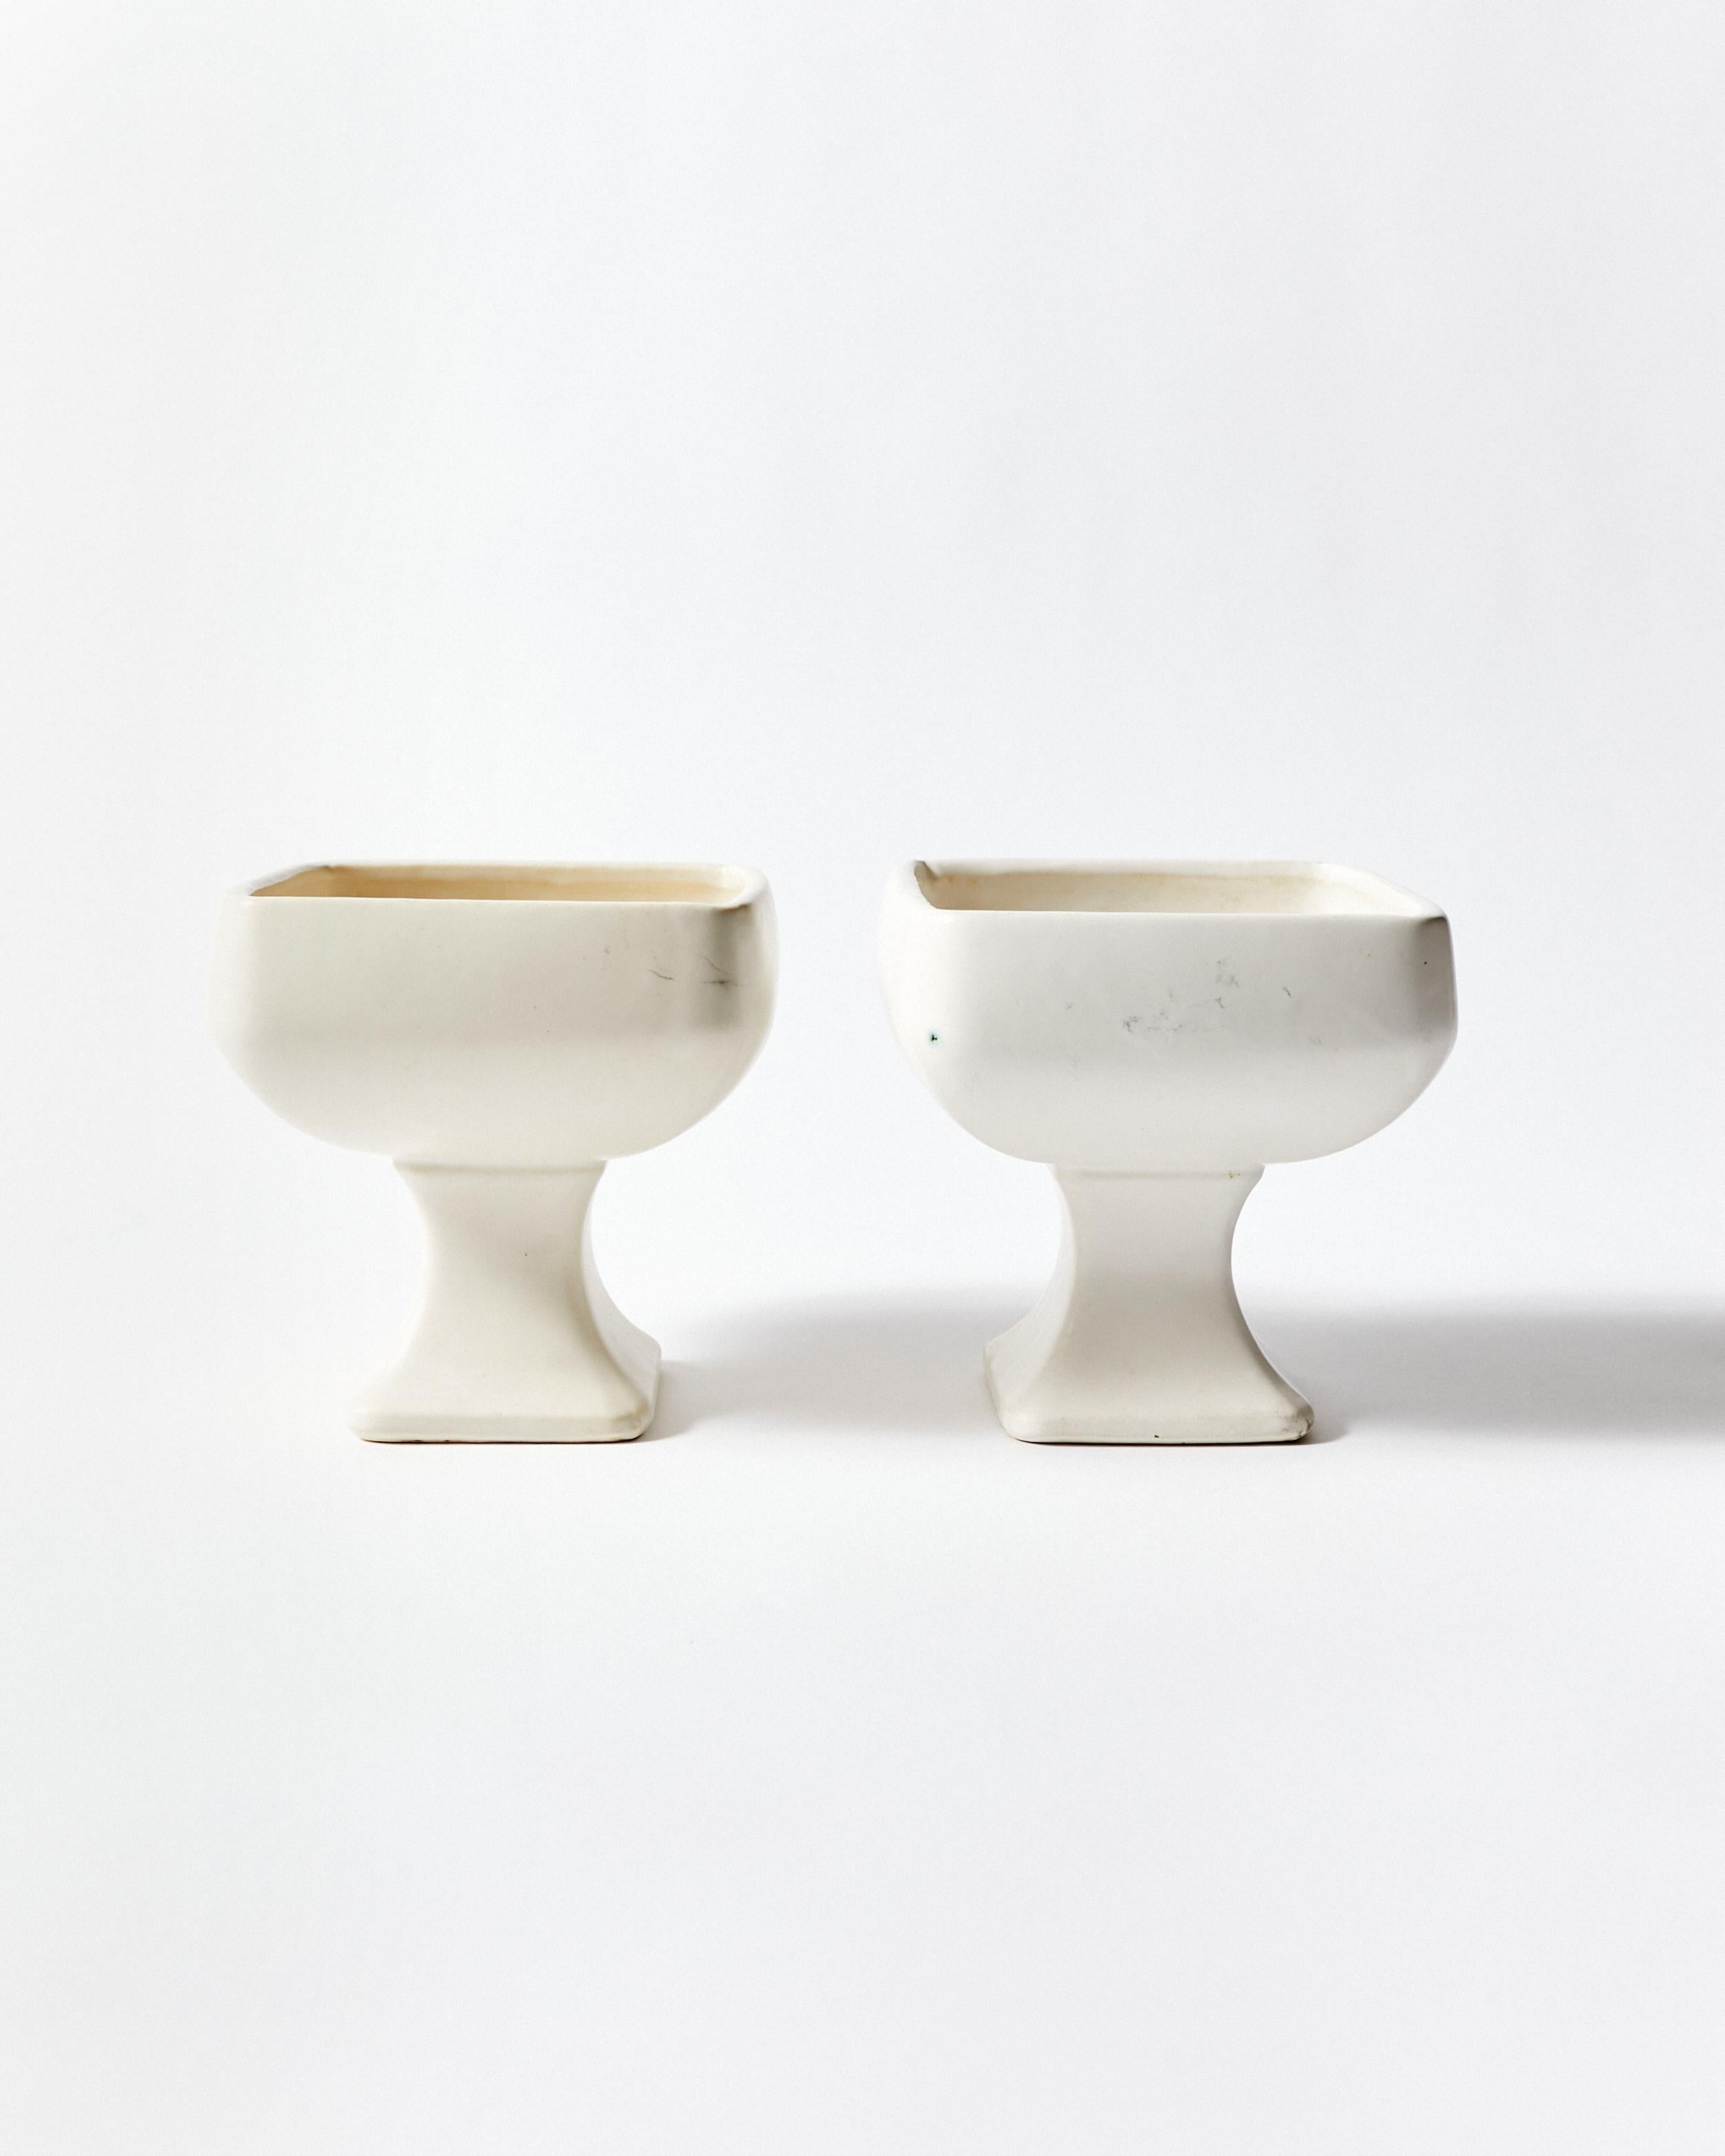 Set of two white ceramic vases designed by Nelson McCoy for Floraline in 1960.